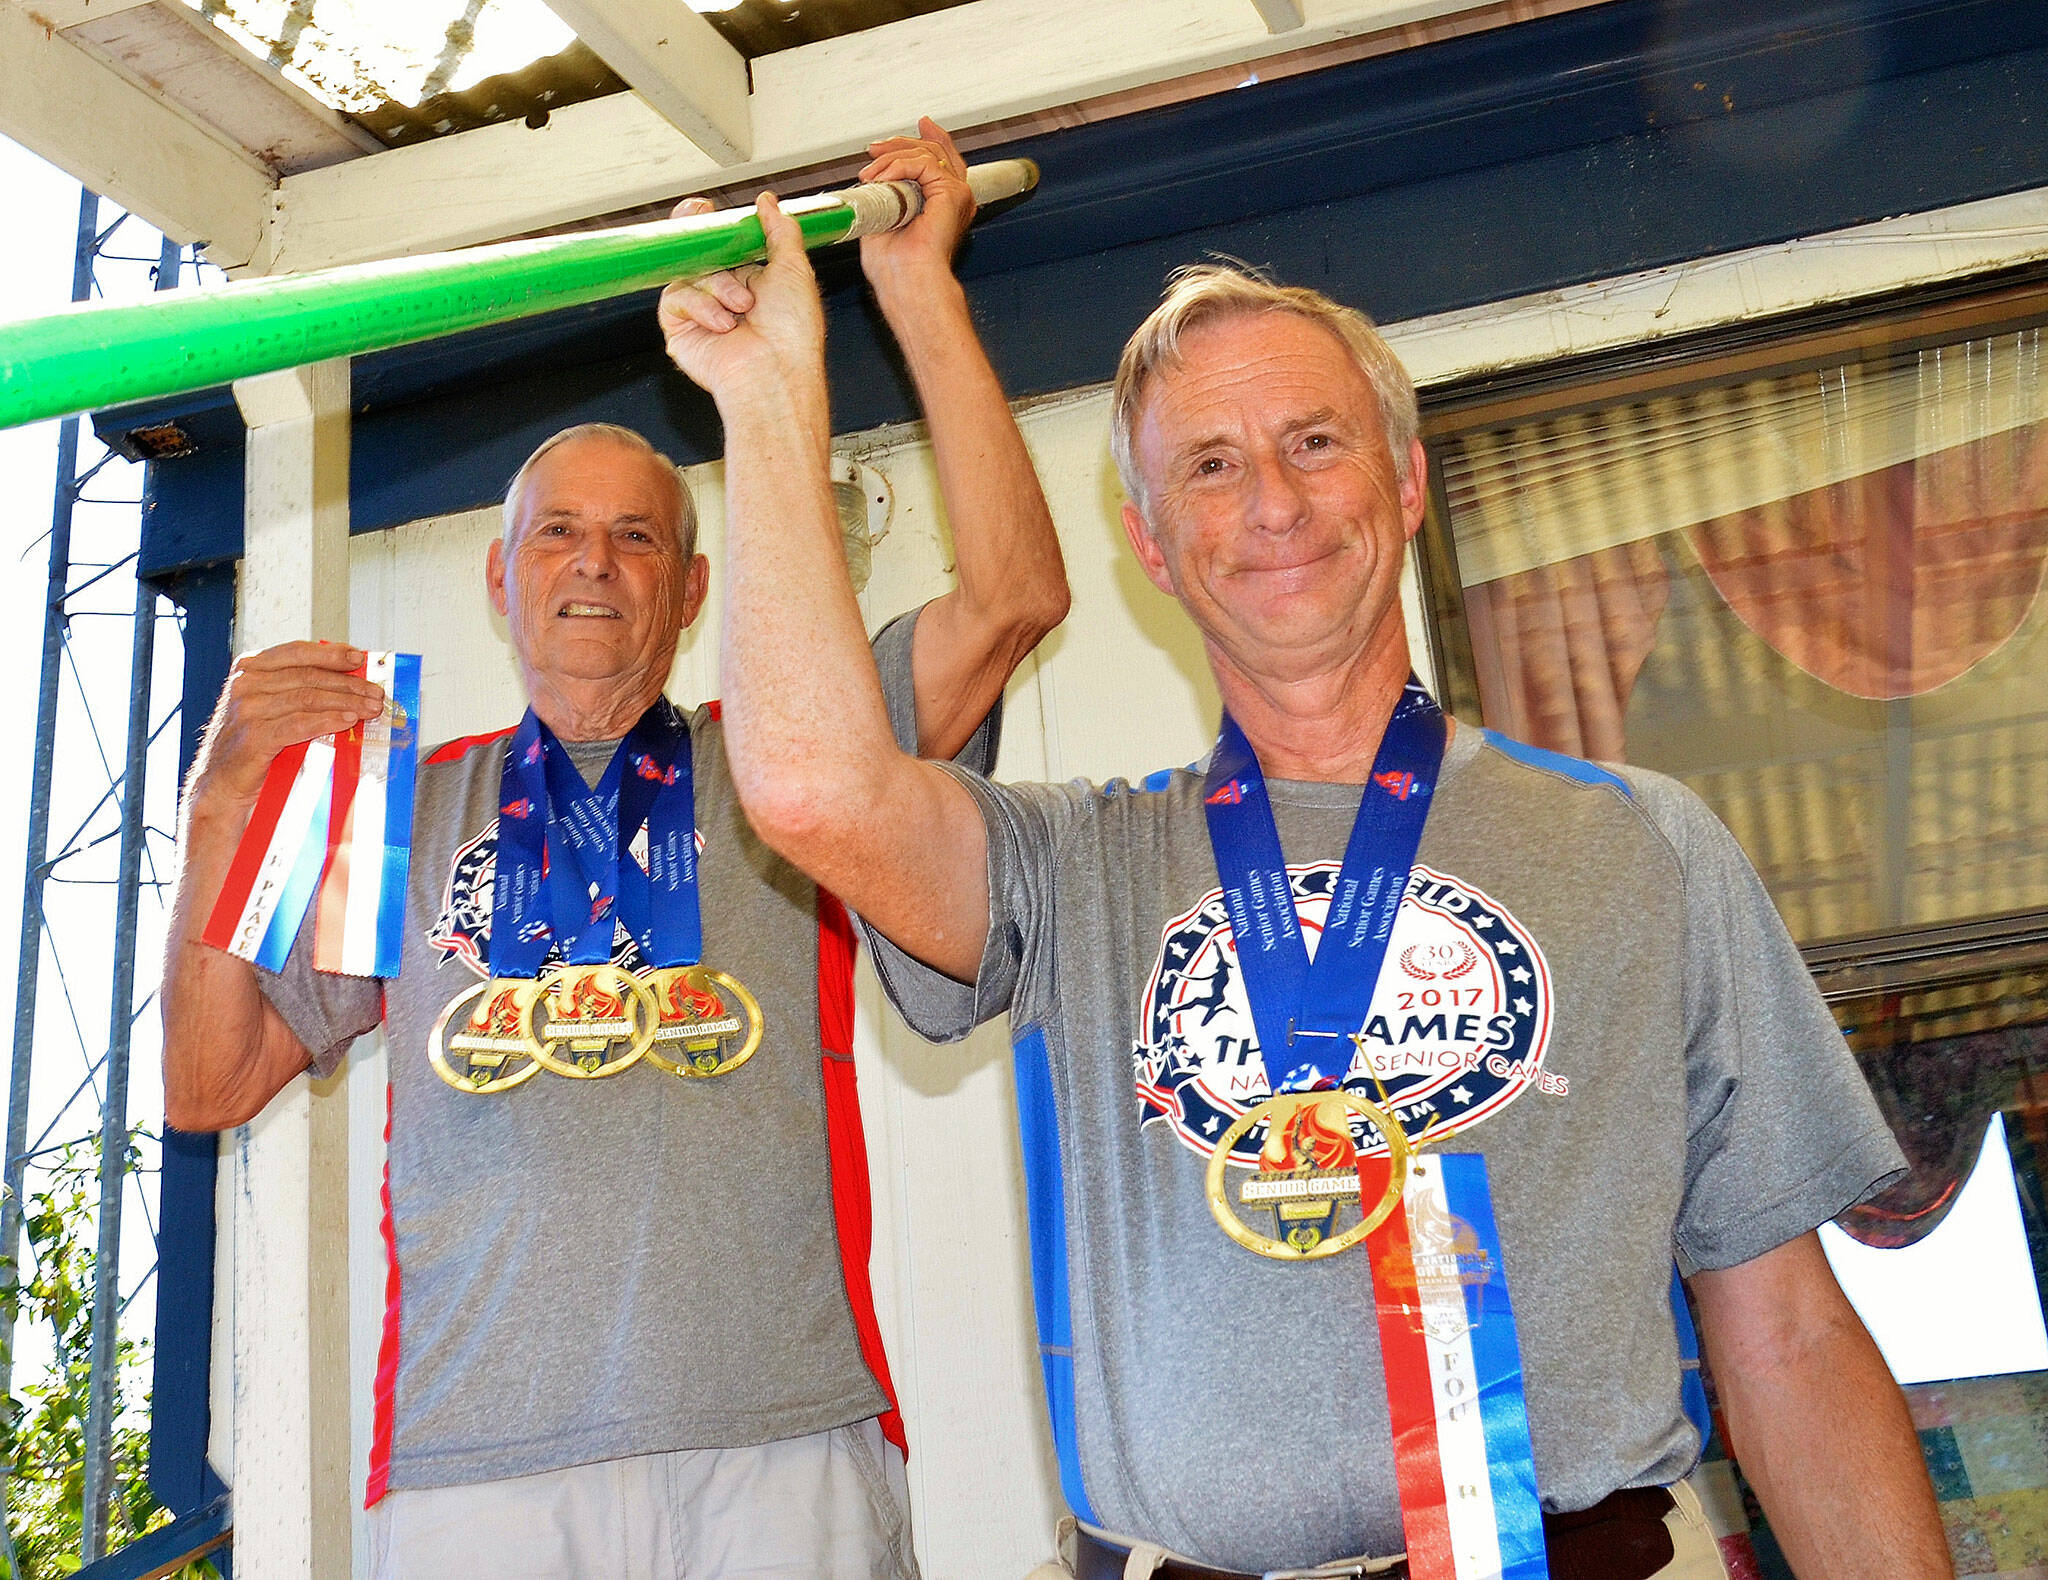 Photo courtesy of Milliman family
Chuck (left) and Phil Milliman earned gold medals in the pole vault at the Birmingham 2017 National Senior Games in Alabama.